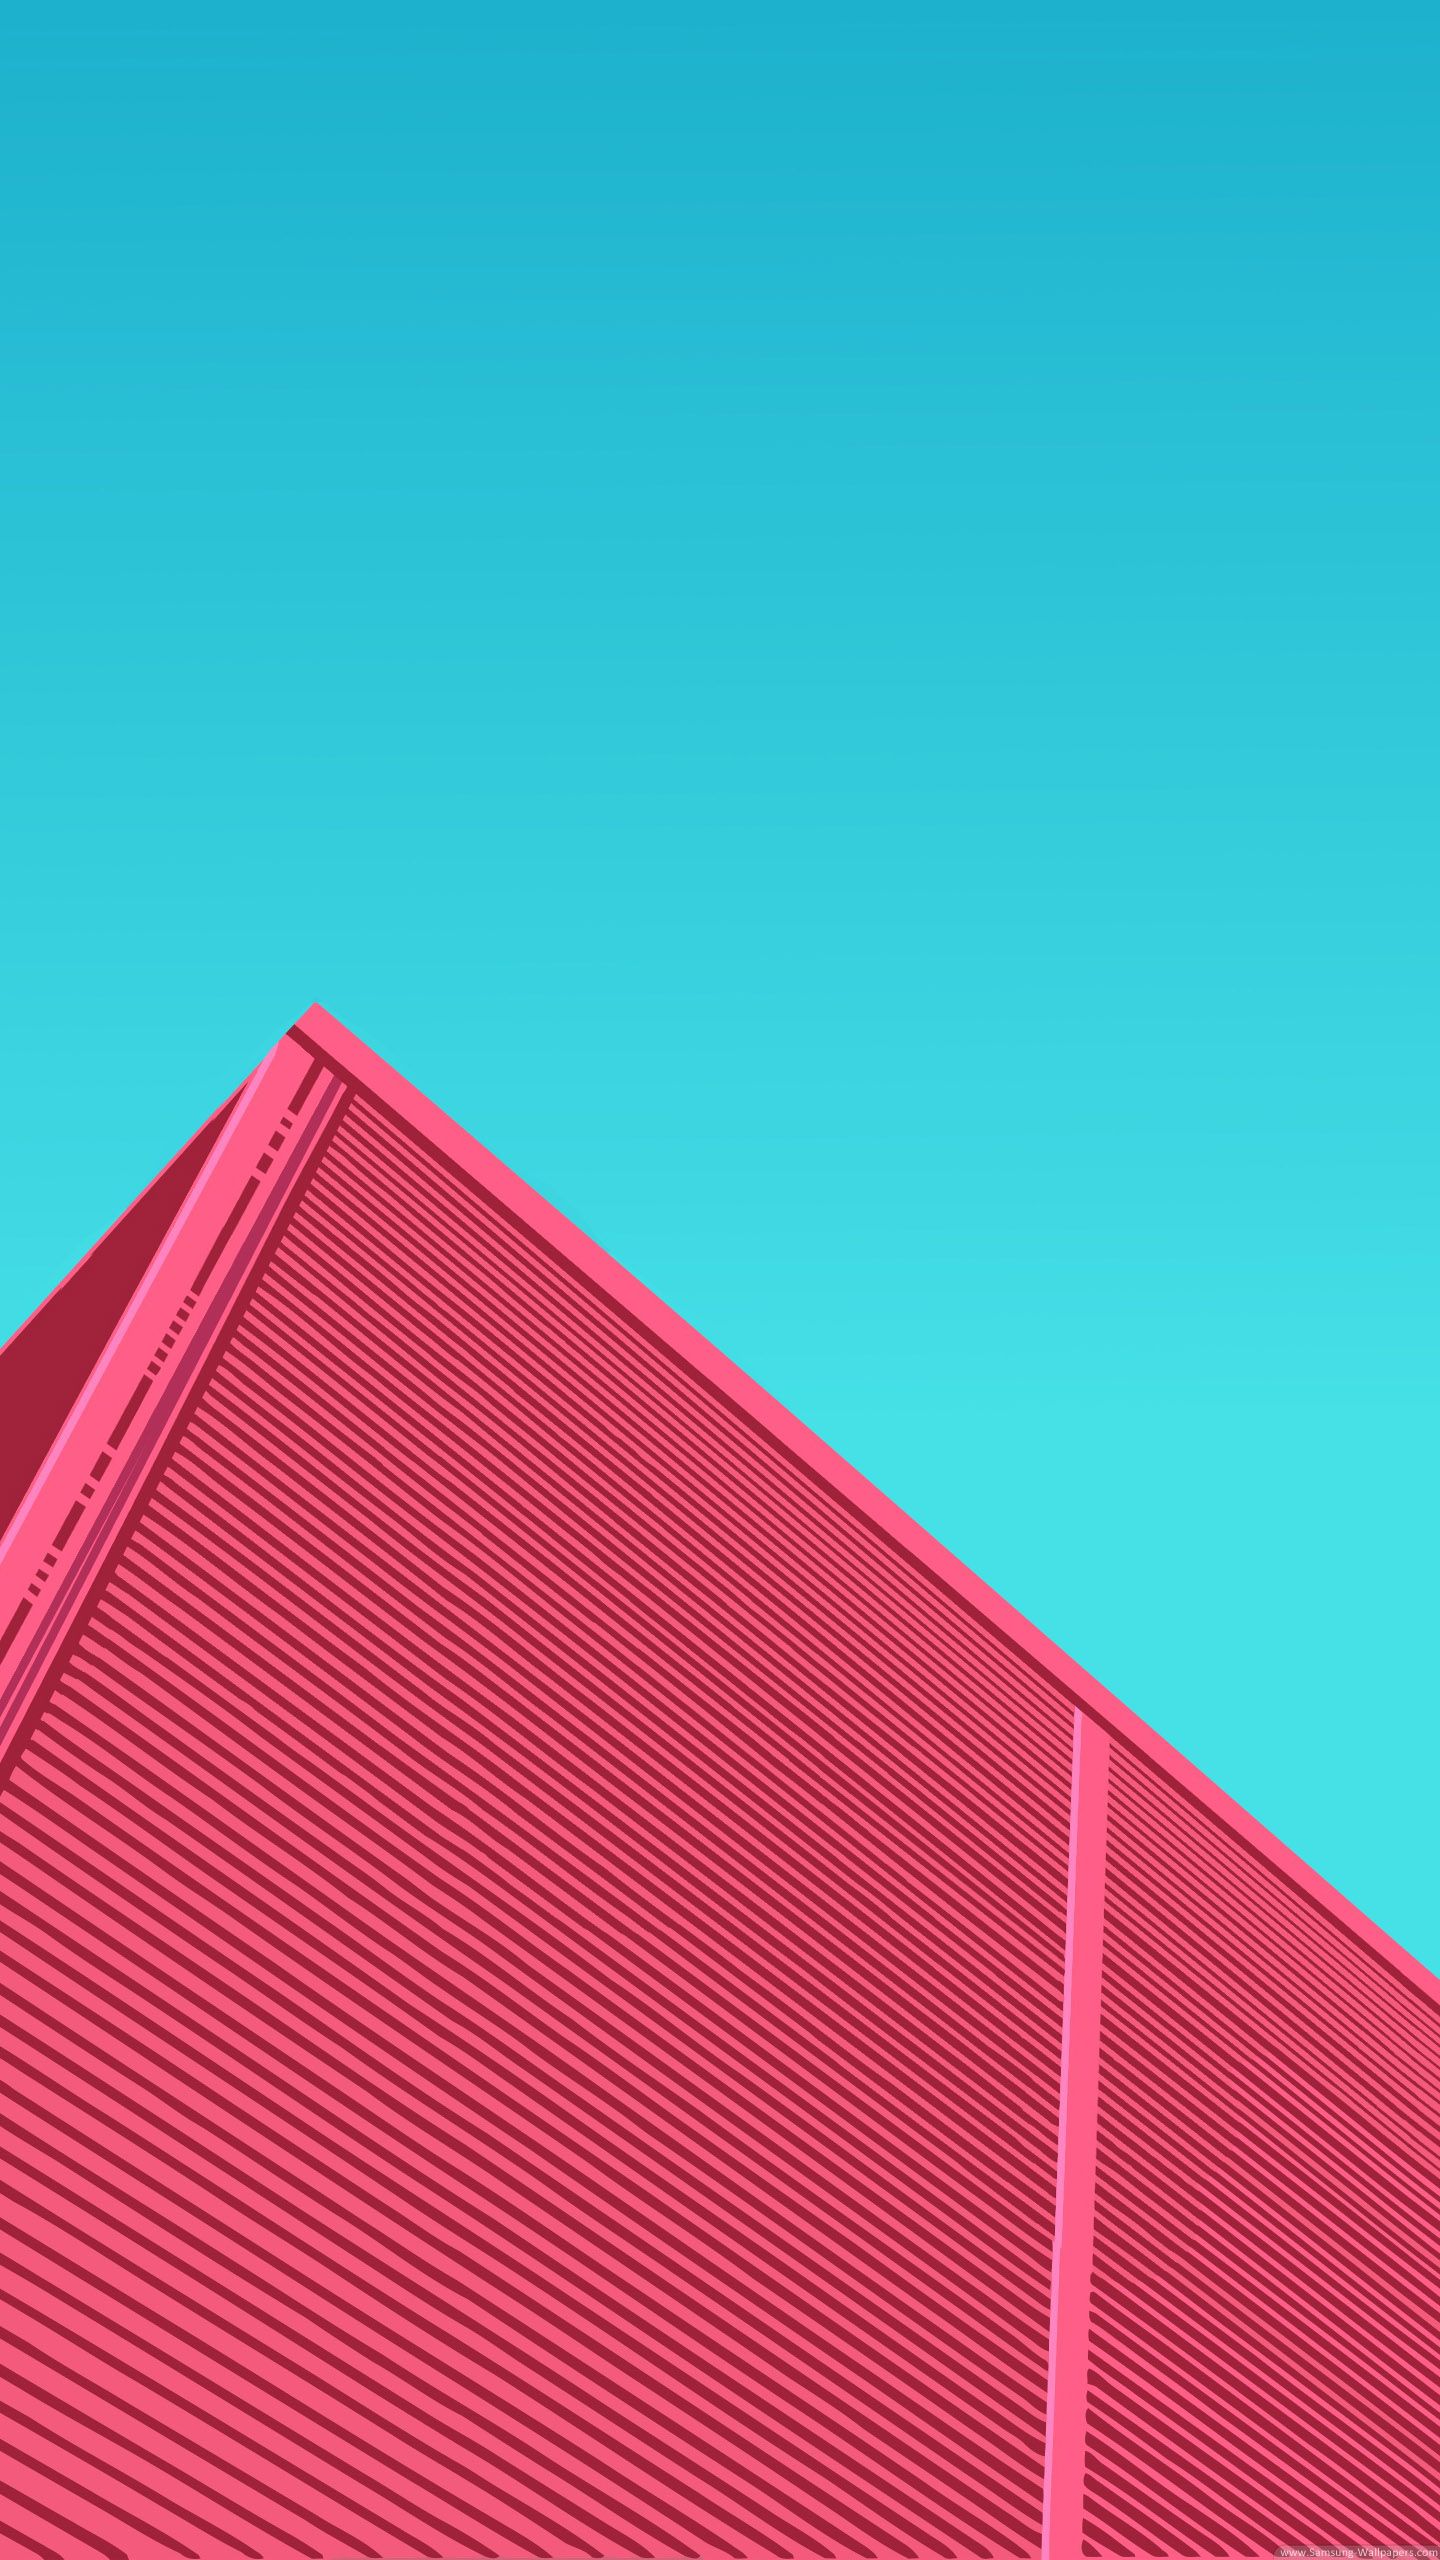 lg g4 wallpaper,red,pink,blue,turquoise,roof